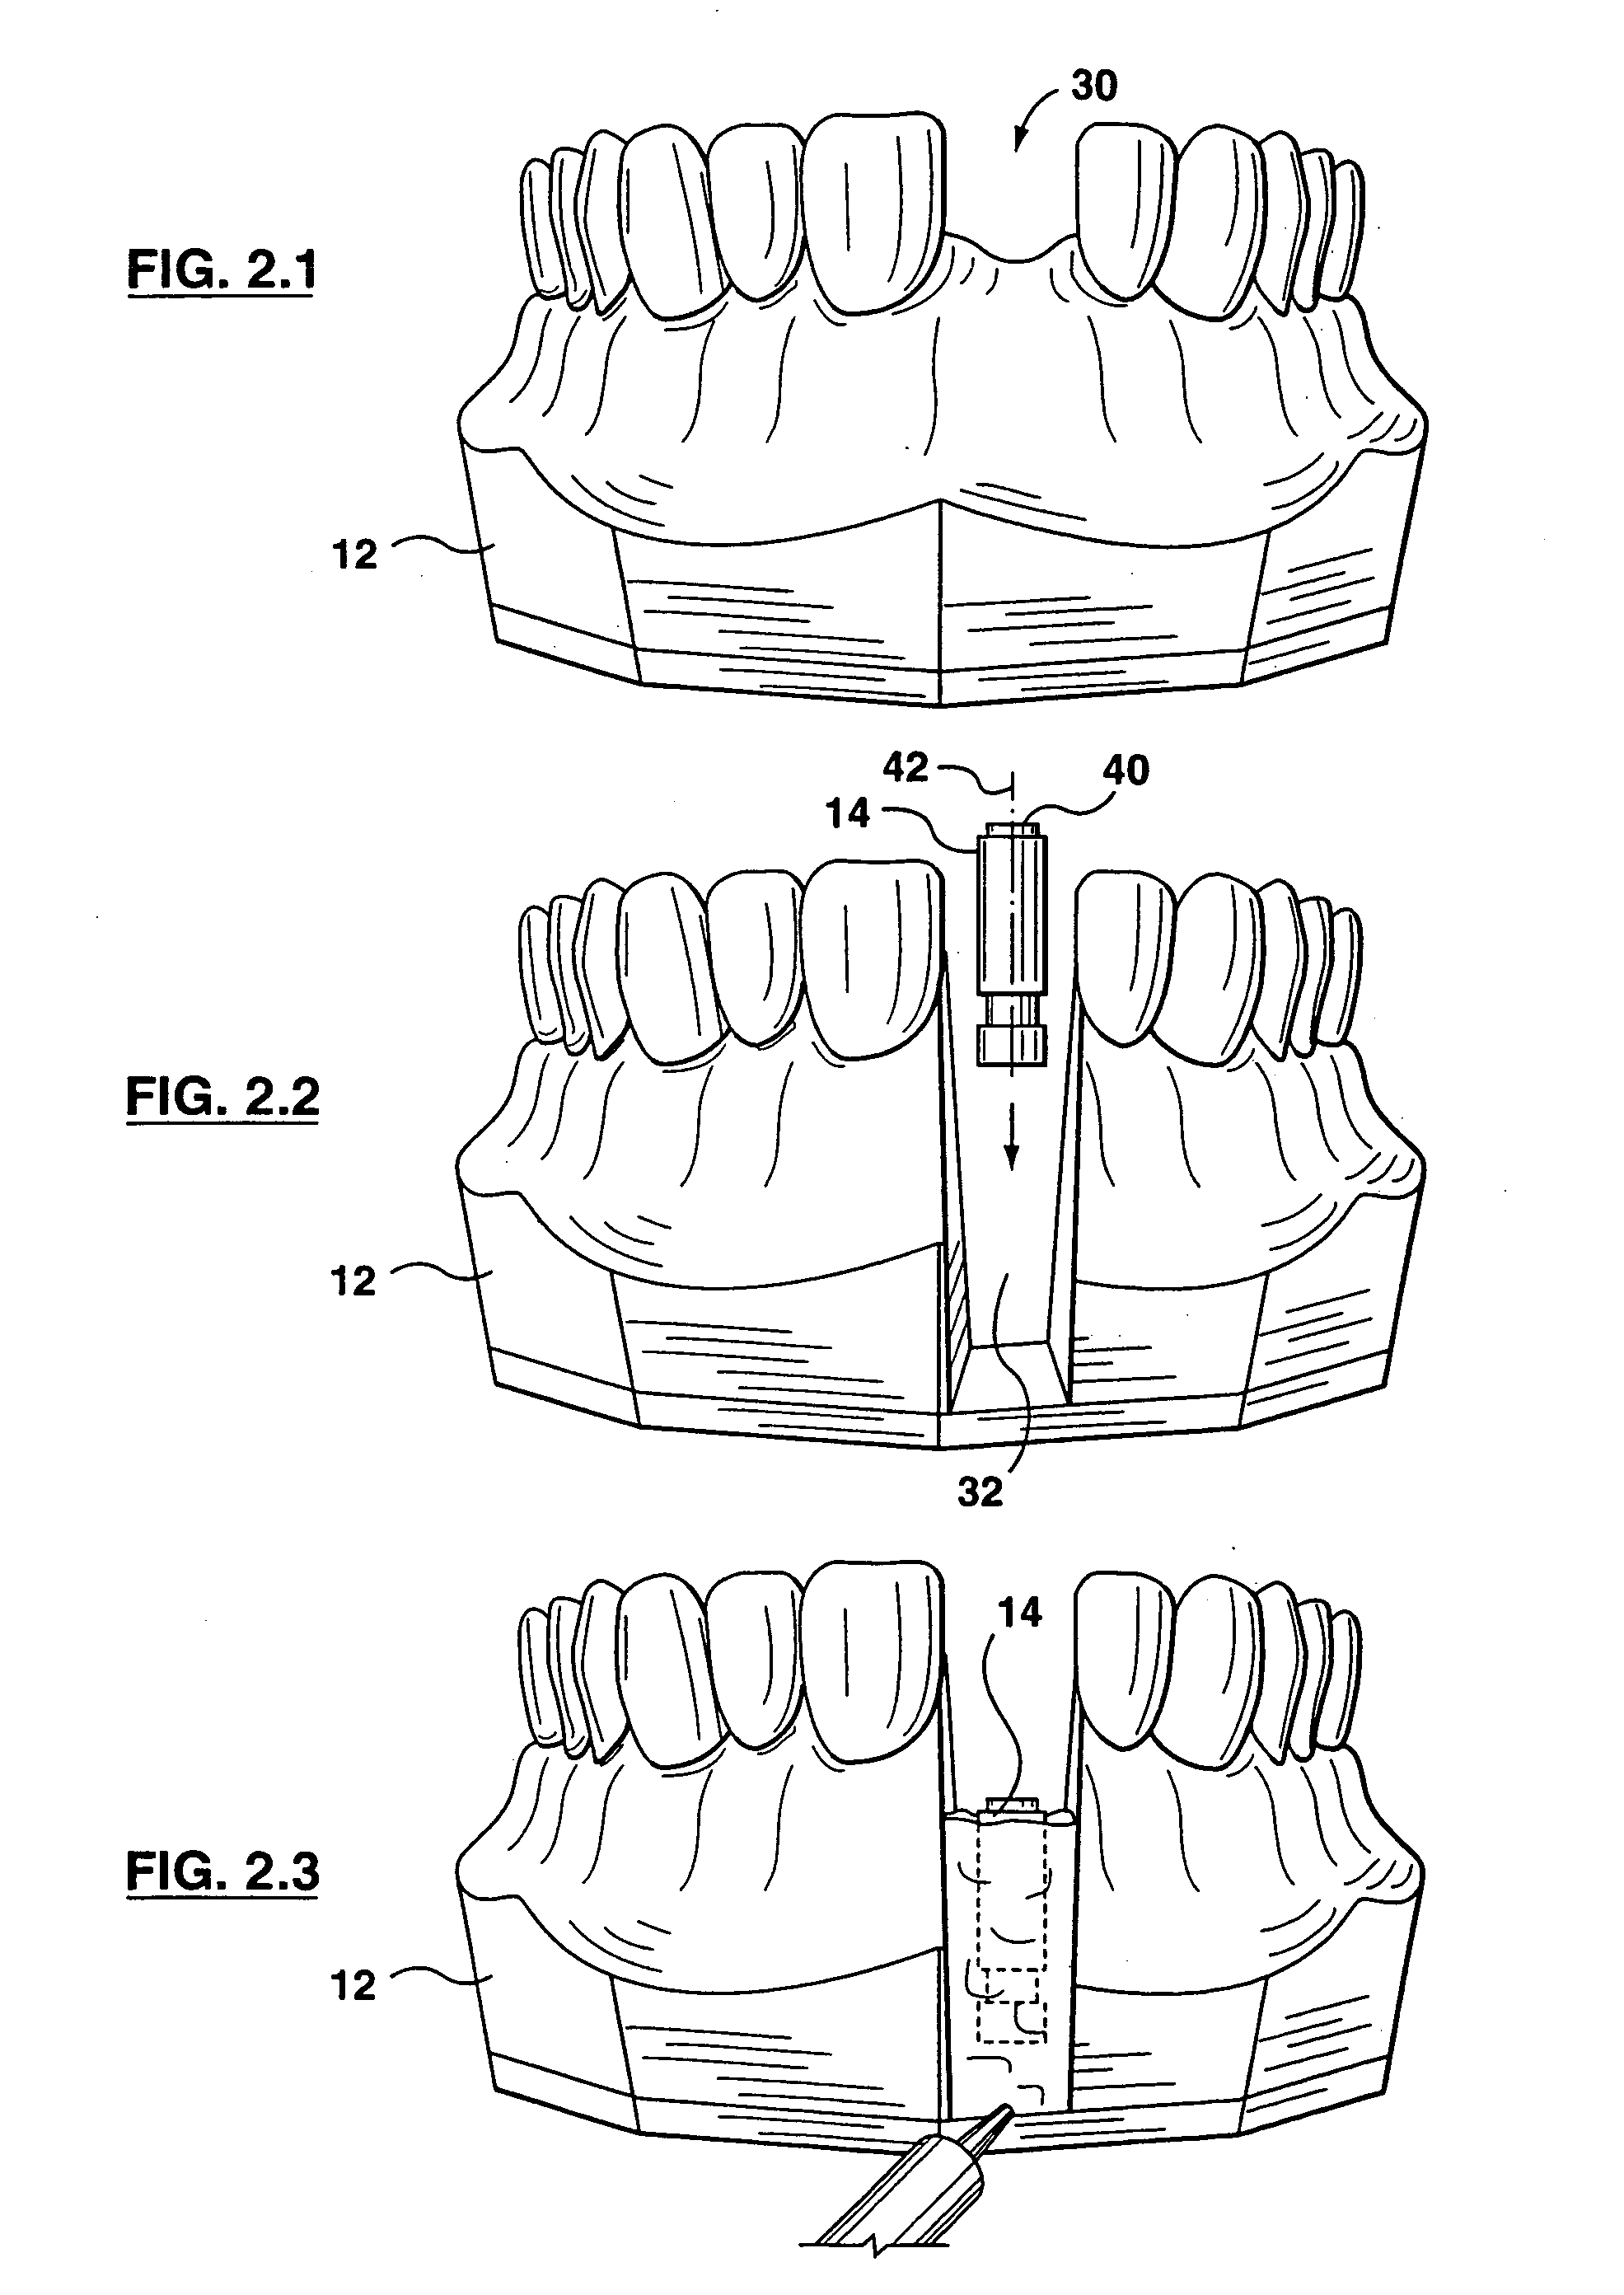 Implant positioning device and method